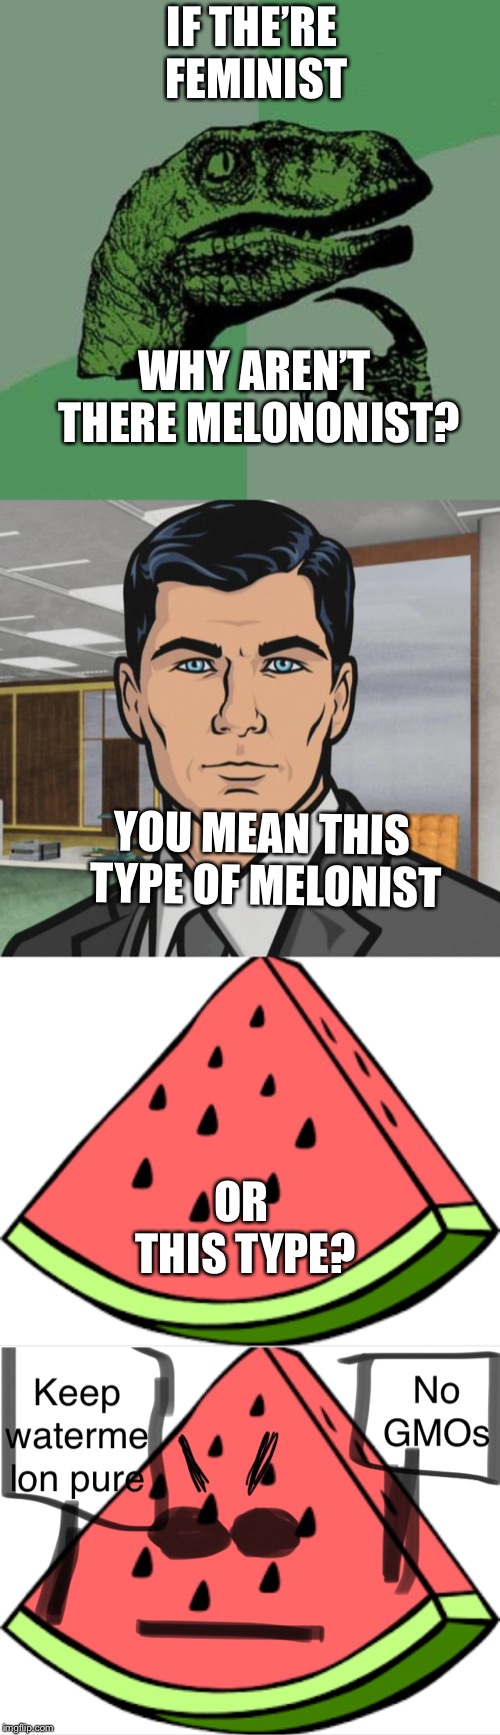 If the’re feminist | IF THE’RE FEMINIST; WHY AREN’T THERE MELONONIST? YOU MEAN THIS TYPE OF MELONIST; OR THIS TYPE? | image tagged in memes,philosoraptor,archer,feminism,funny,i wonder | made w/ Imgflip meme maker